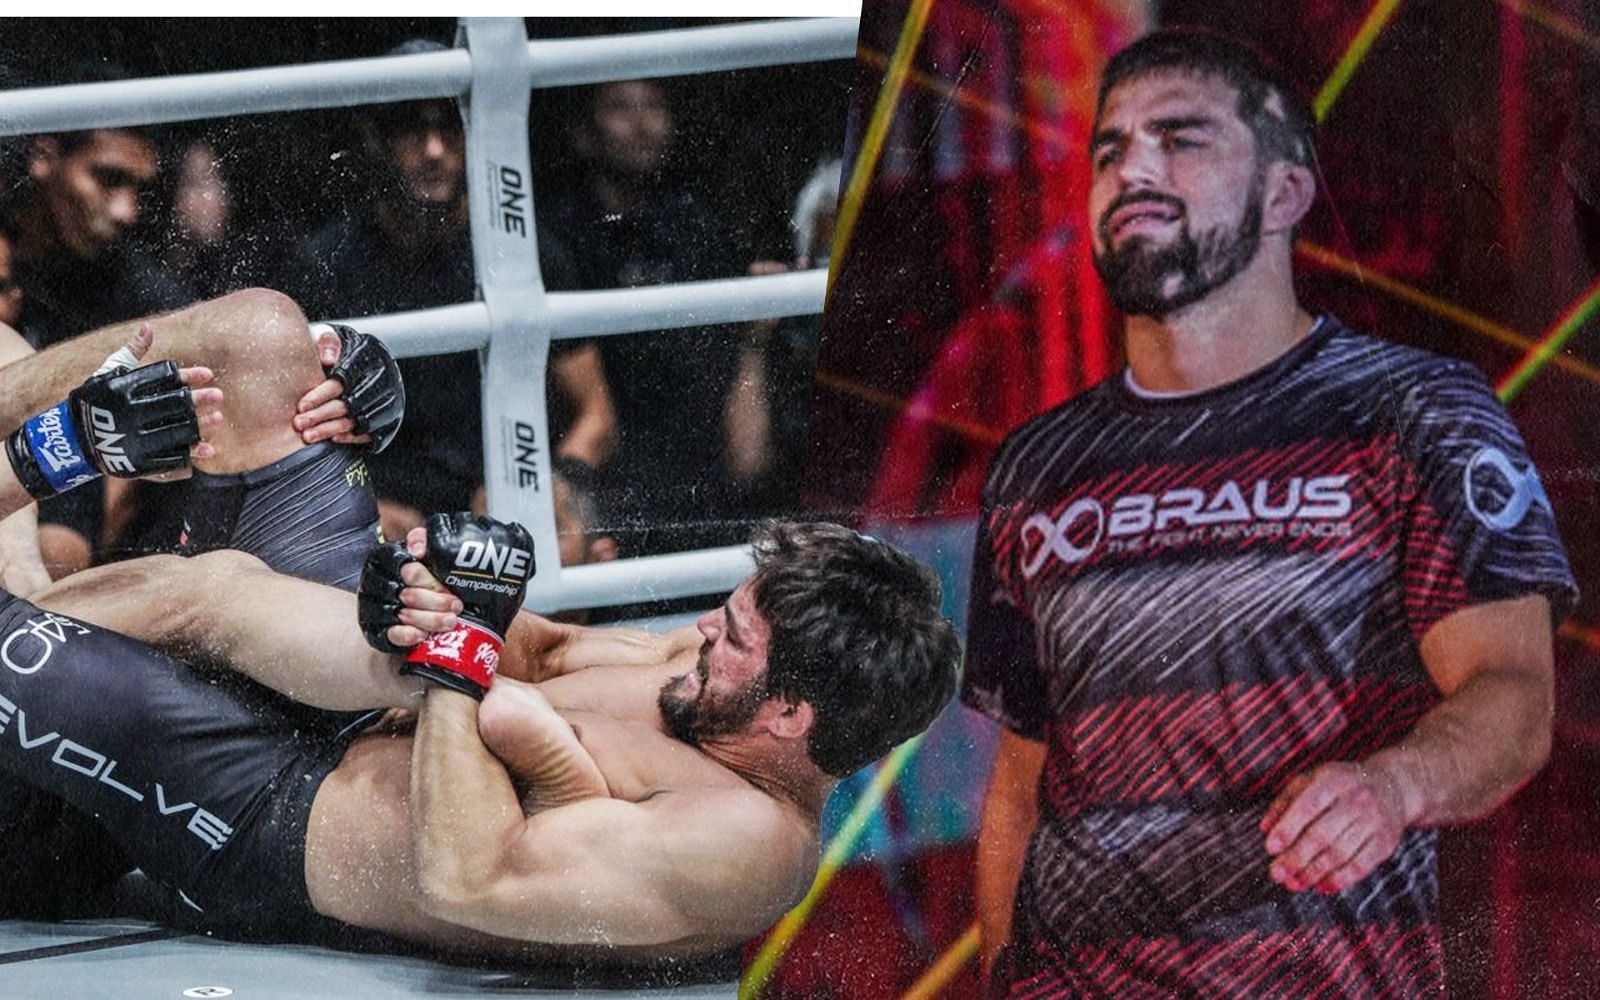 ONE featherweight fighter and BJJ icon Garry Tonon shows his inside heel hook mastery. (Image courtesy of ONE)